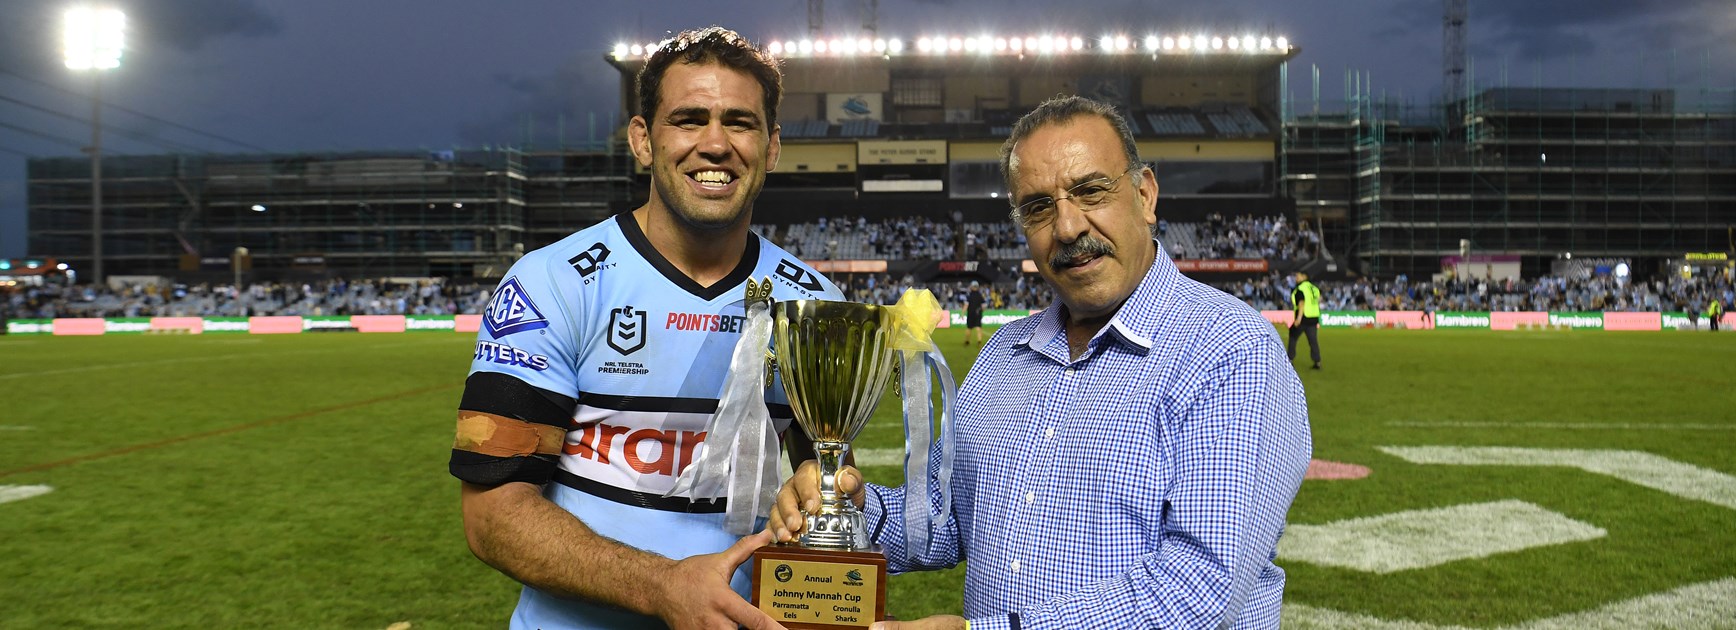 For the Johnny Mannah Cup